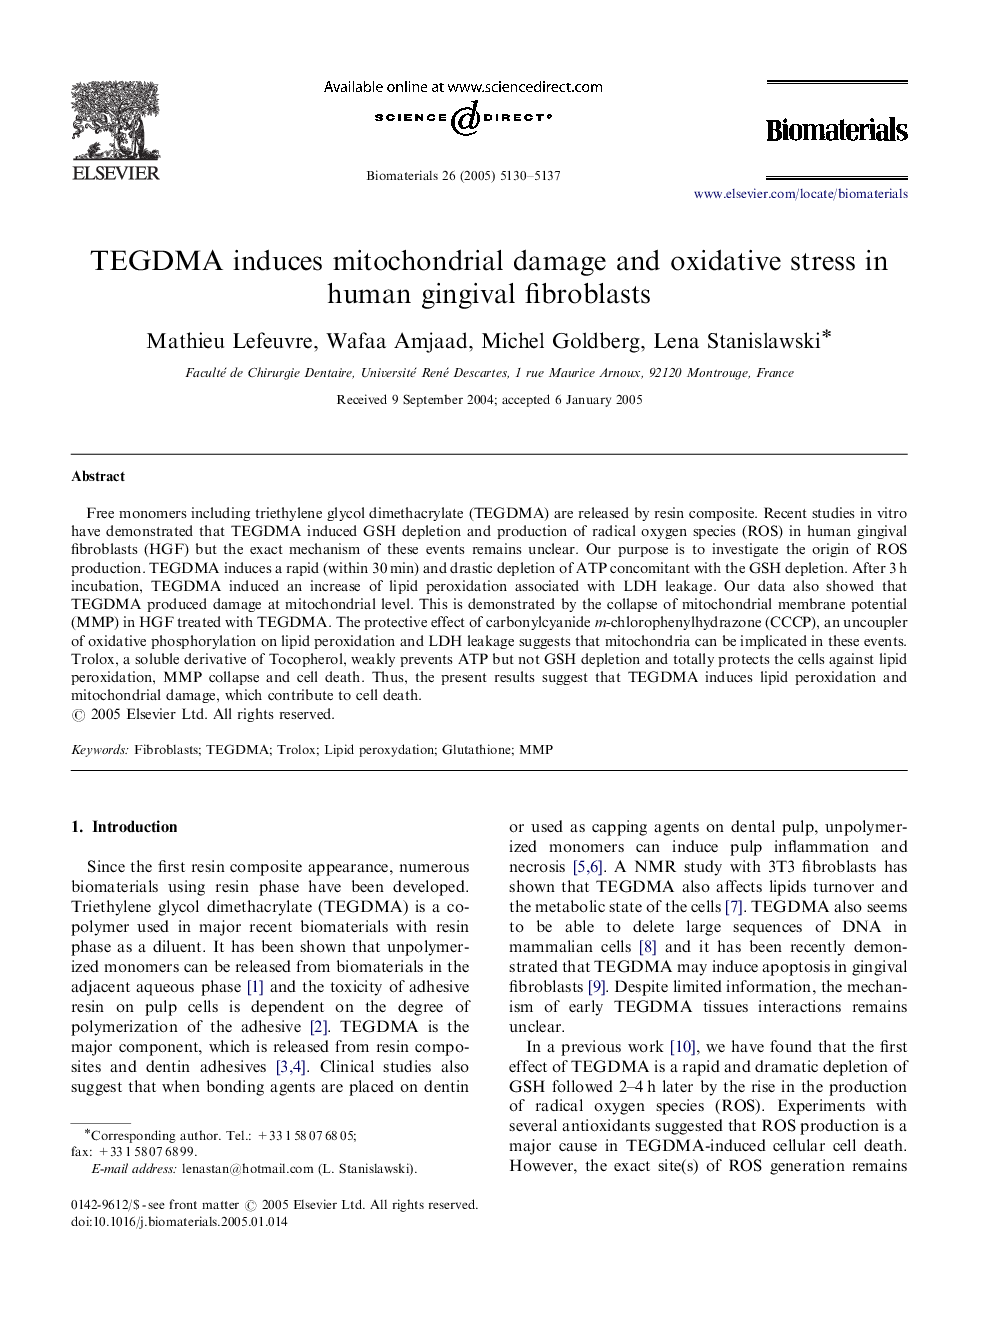 TEGDMA induces mitochondrial damage and oxidative stress in human gingival fibroblasts